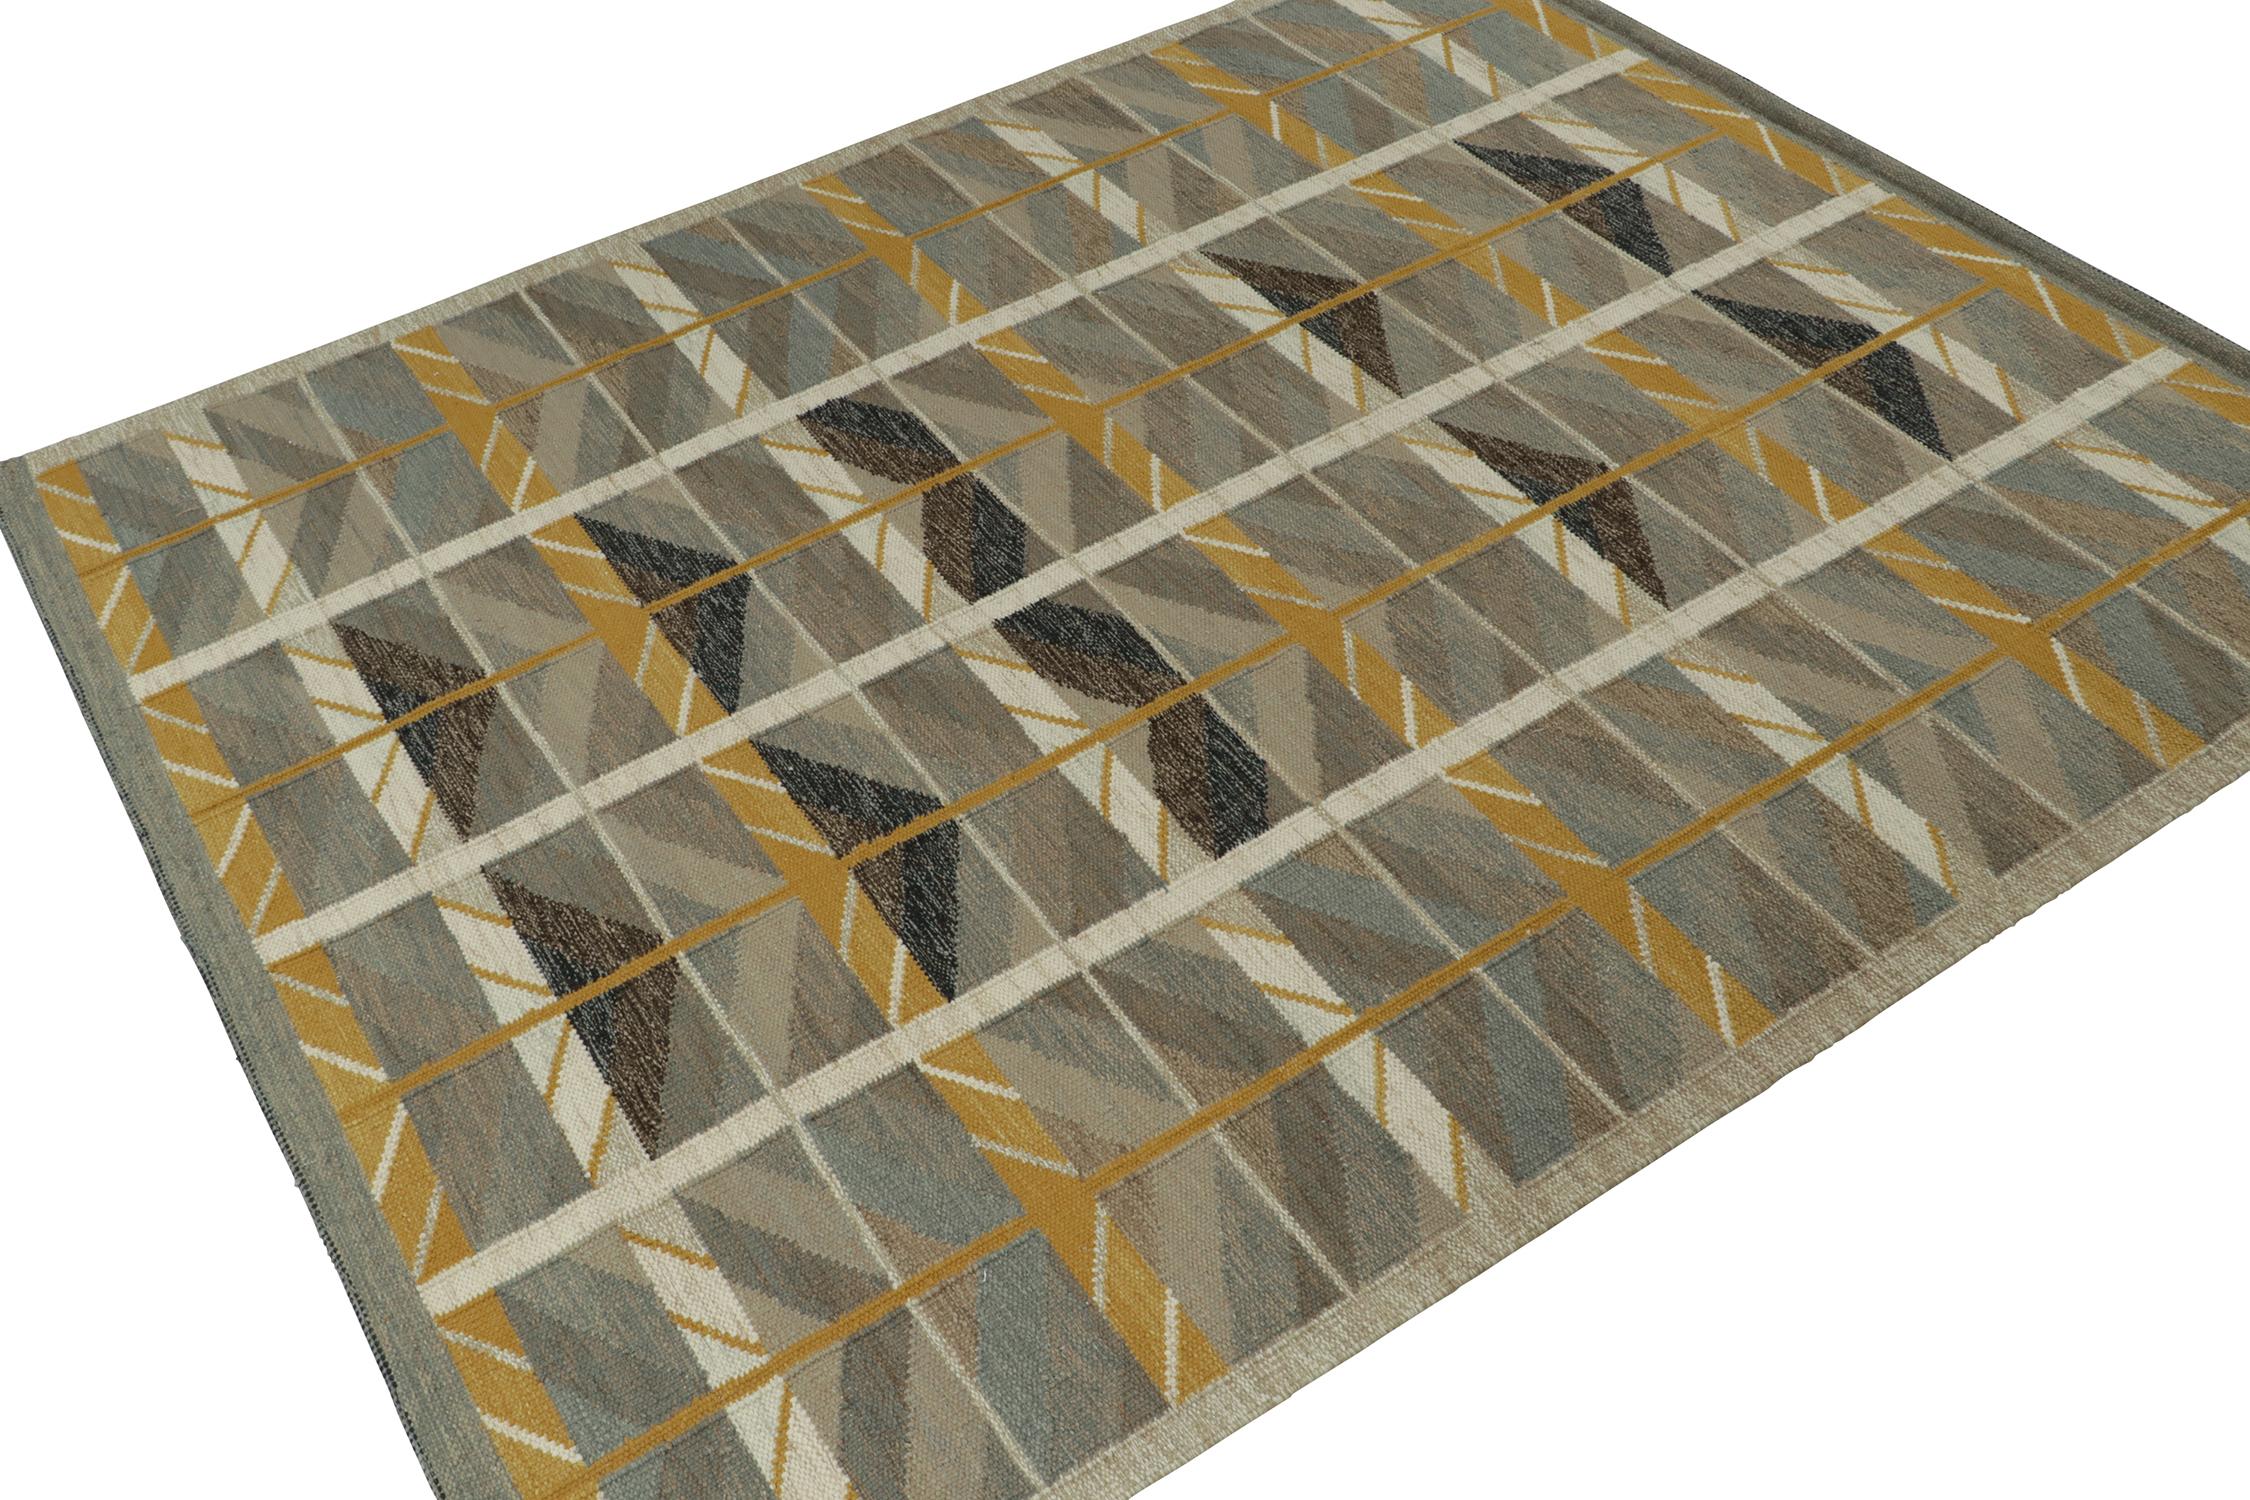 his 8x10 Swedish style kilim is the next addition to Rug & Kilim's award-winning Scandinavian flat weave collection. Handwoven in wool. 
On the design: 
This rug enjoys a smart play of chevrons and grid-like geometric patterns in beige-brown,